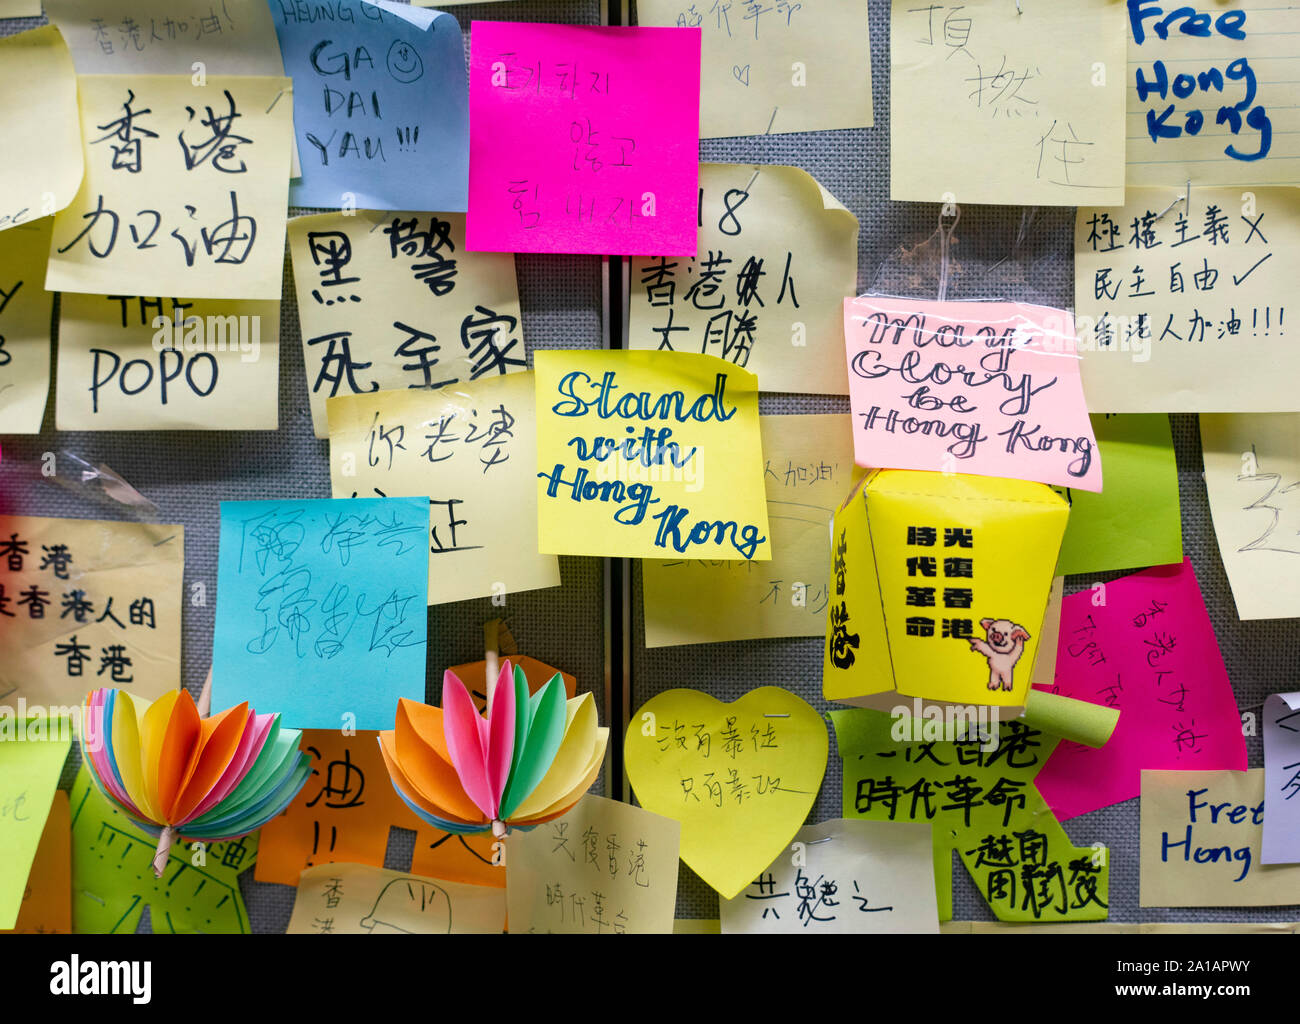 Pro democracy and anti extradition law protests, slogans and posters on Lennon Walls in Hong Kong. Pic Lennon Wall protest notes at City University of Hong Kong. Stock Photo